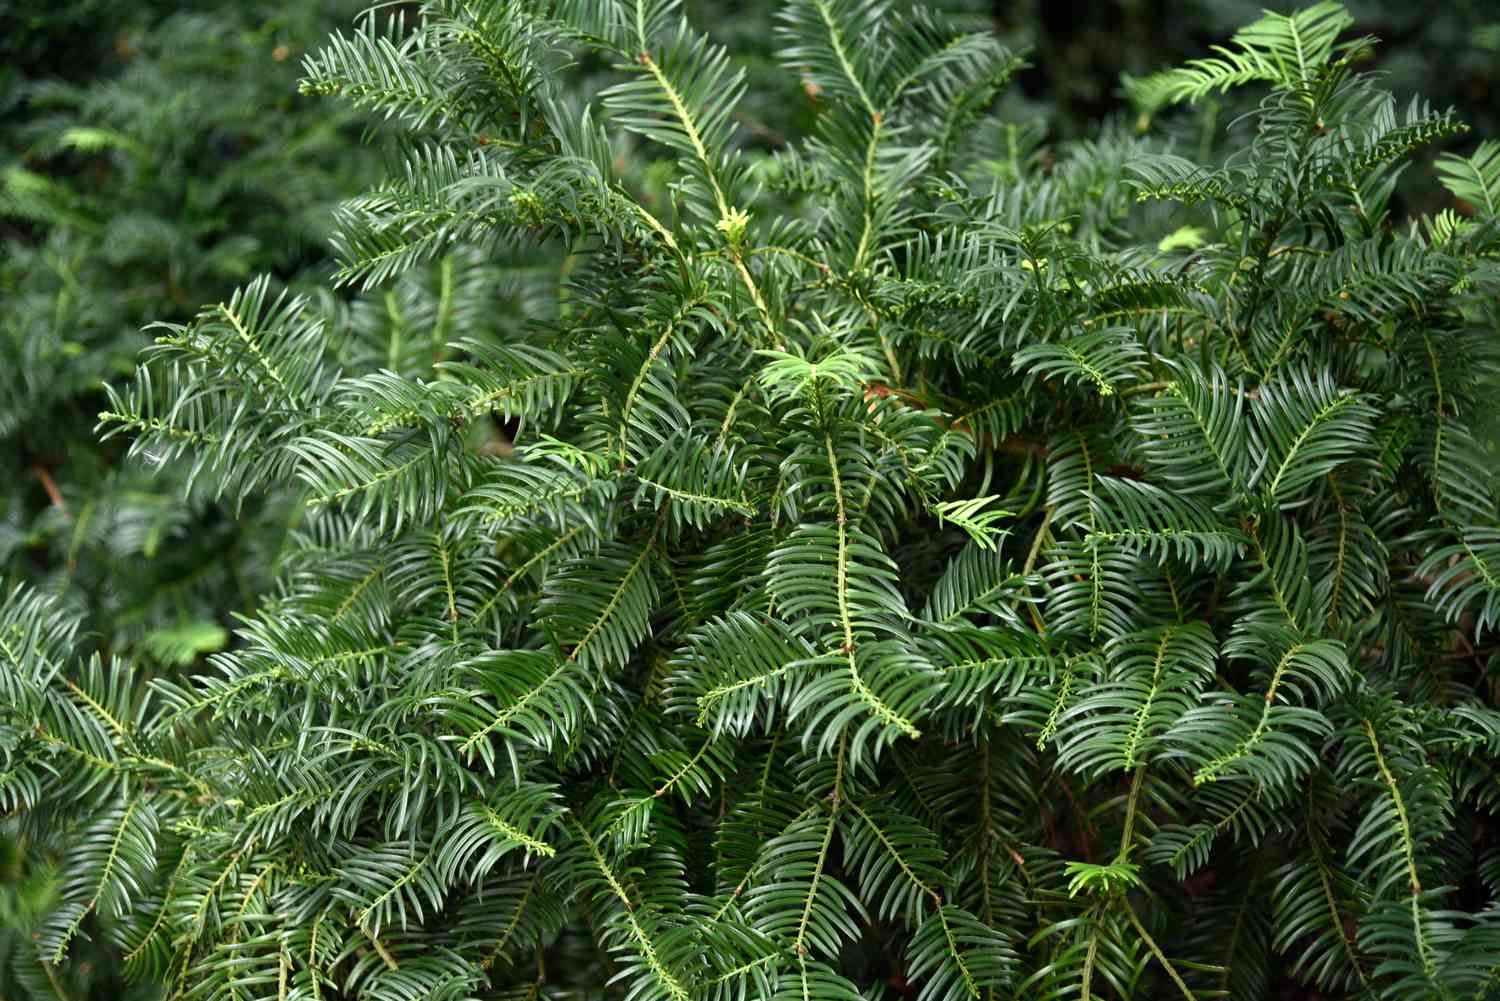 Japanese plum yew shrub with branches of dark green needle-shaped leaves